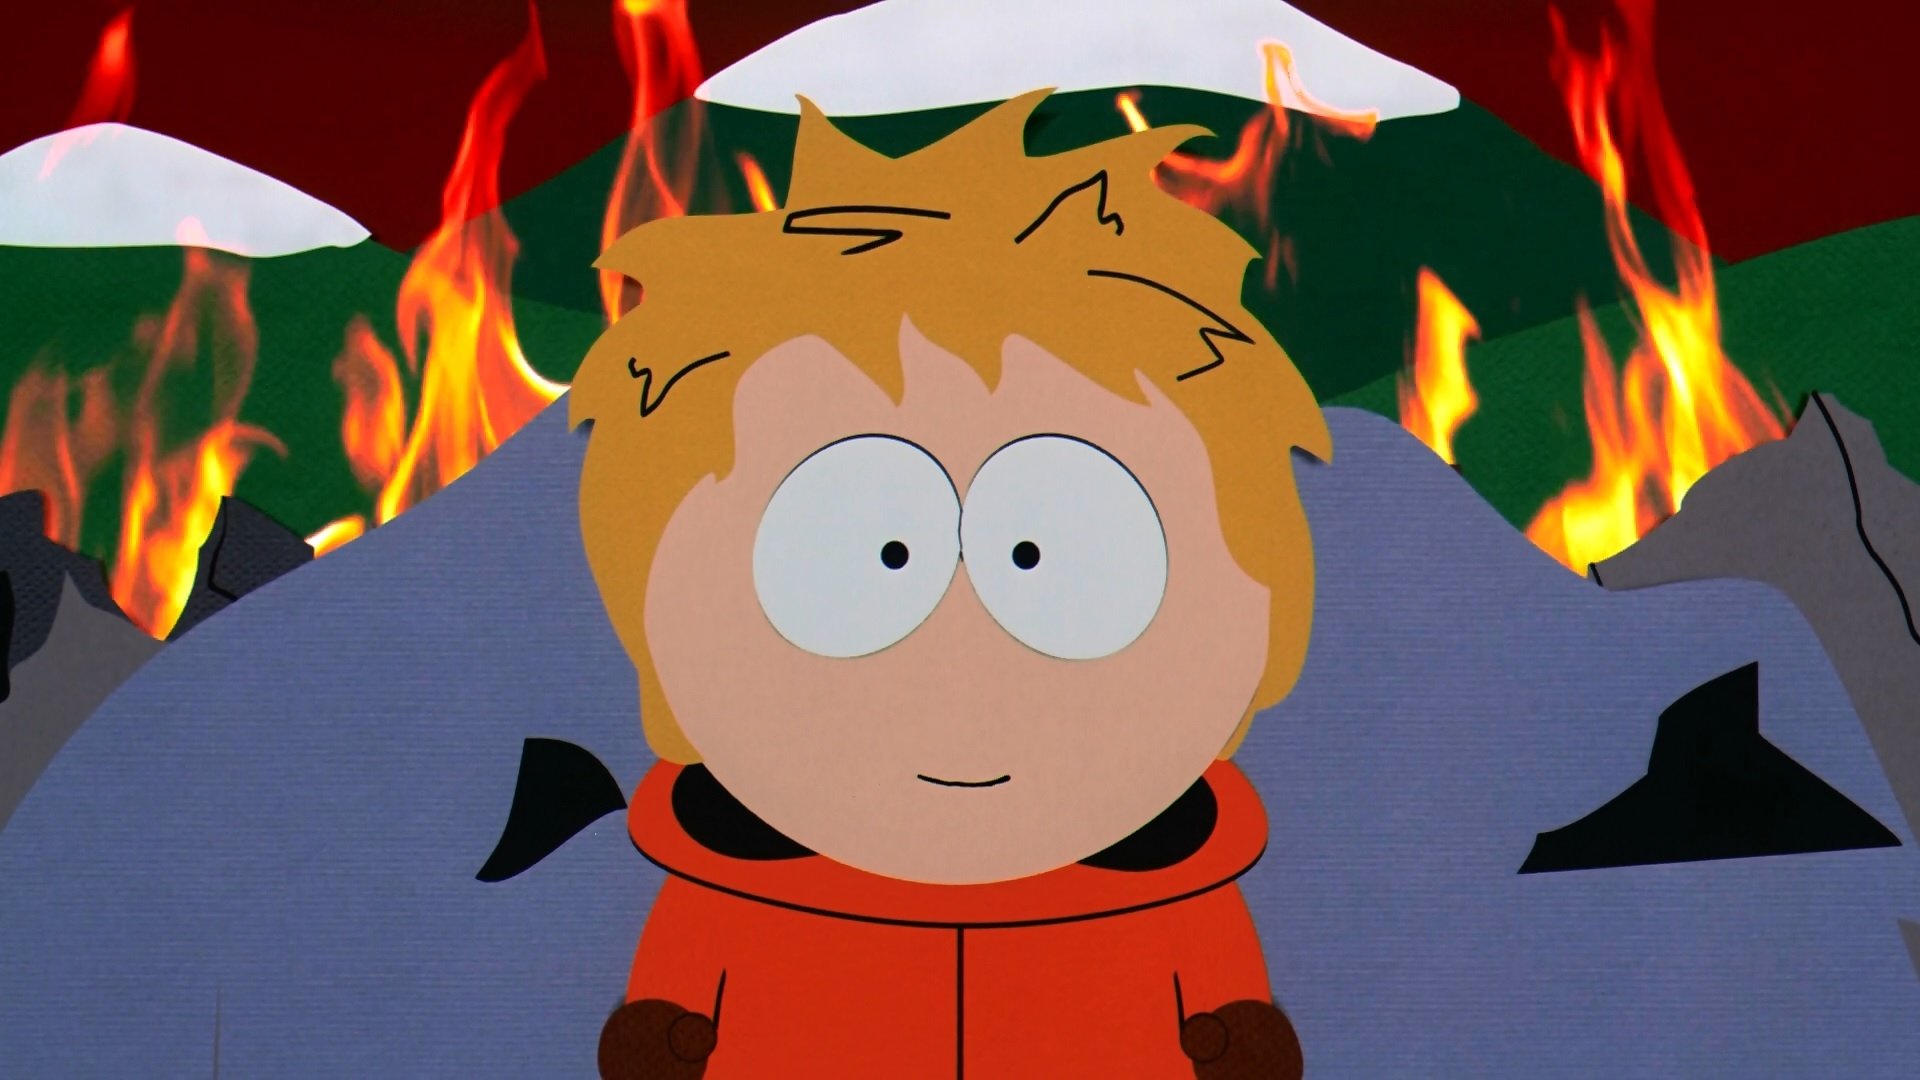 193 south park hd wallpapers background images wallpaper abyss 193 south park hd wallpapers